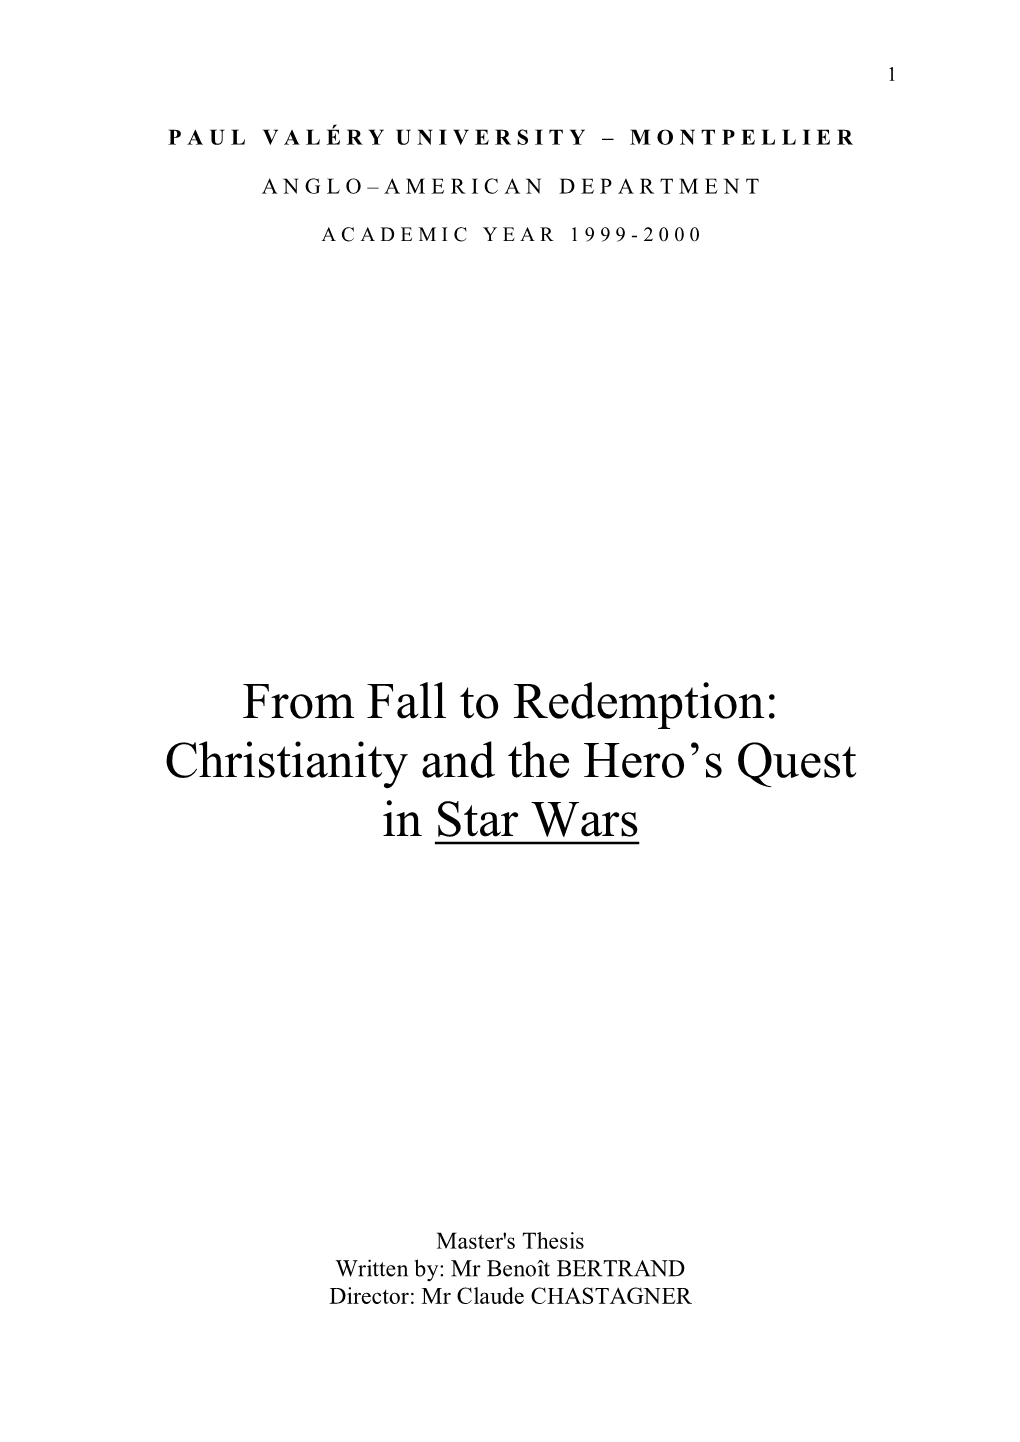 From Fall to Redemption: Christianity and the Hero's Quest in Star Wars